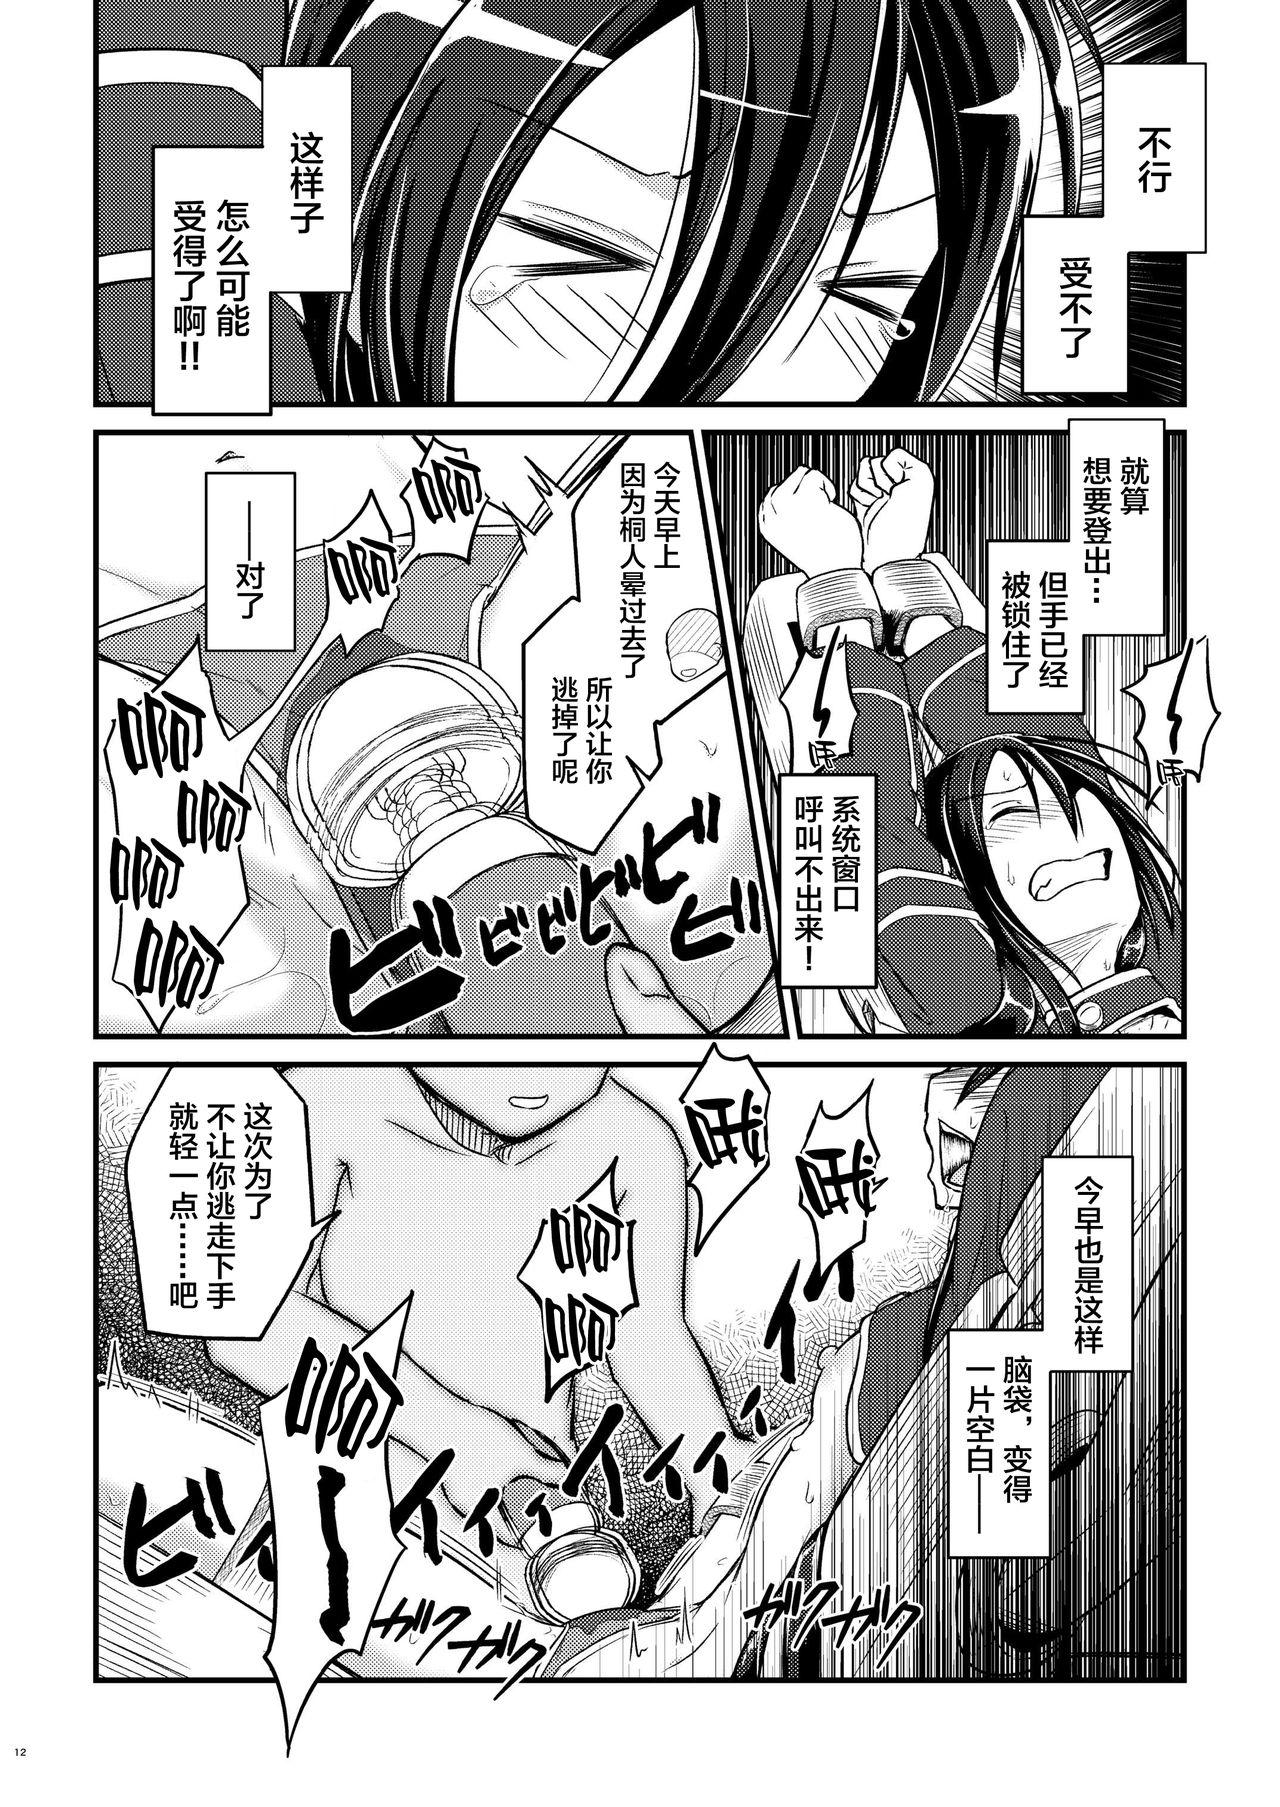 Round Ass Kiriko Route Another A Part Set - Sword art online Reverse Cowgirl - Page 11